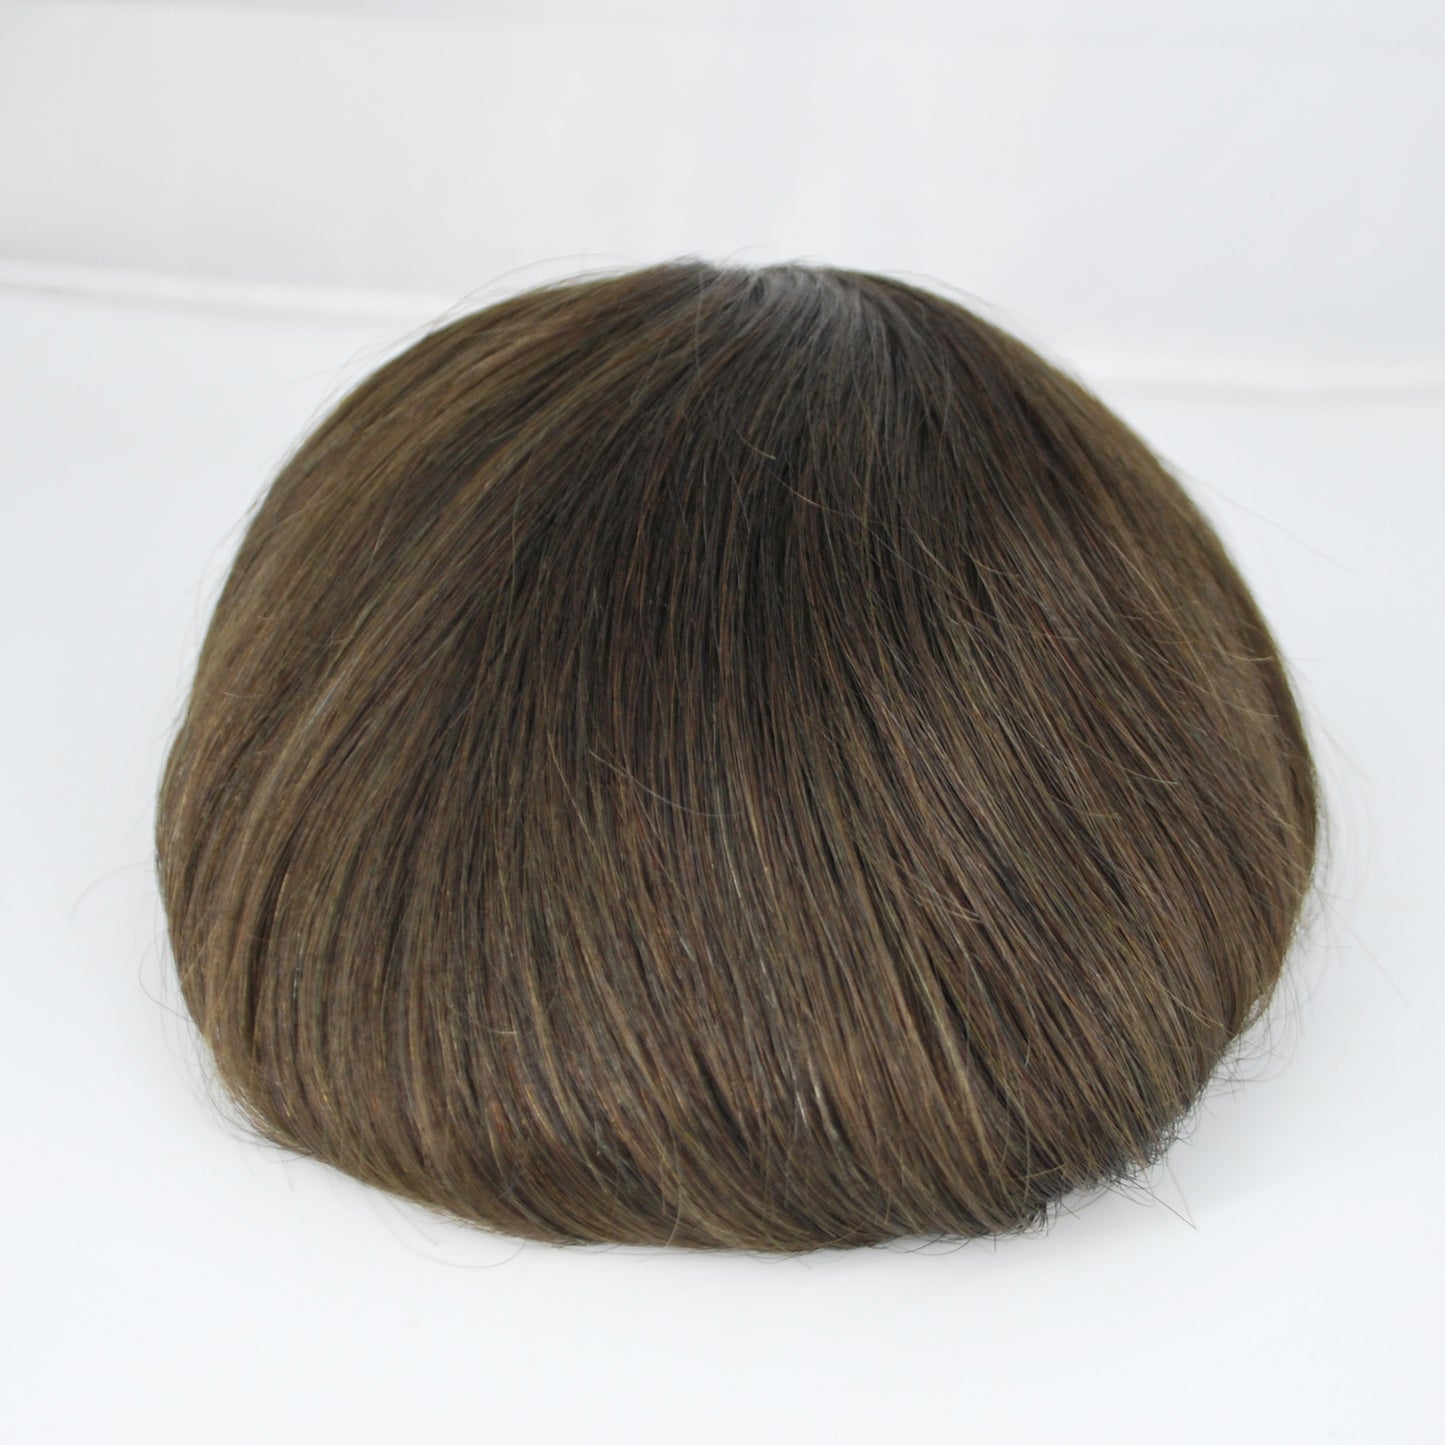 Clearance dark brown toupee thin PU knotted human hair system for men 10x7.5"